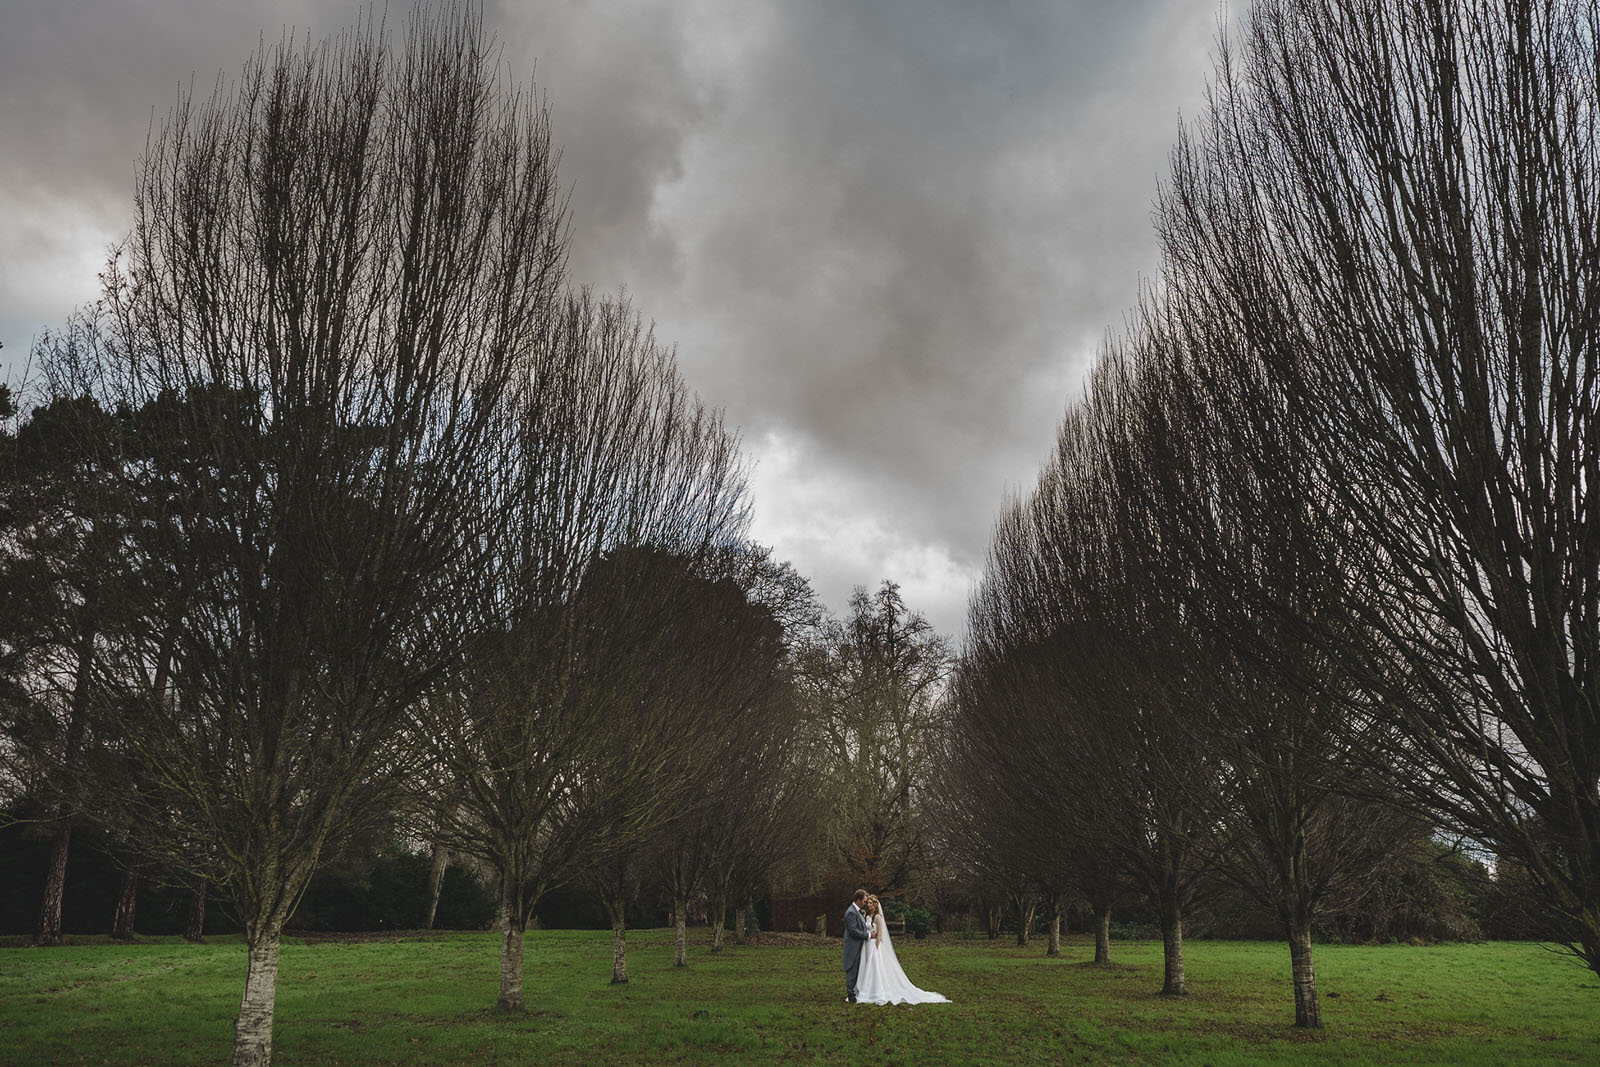 a bride and groom standing in a field under a cloudy sky.